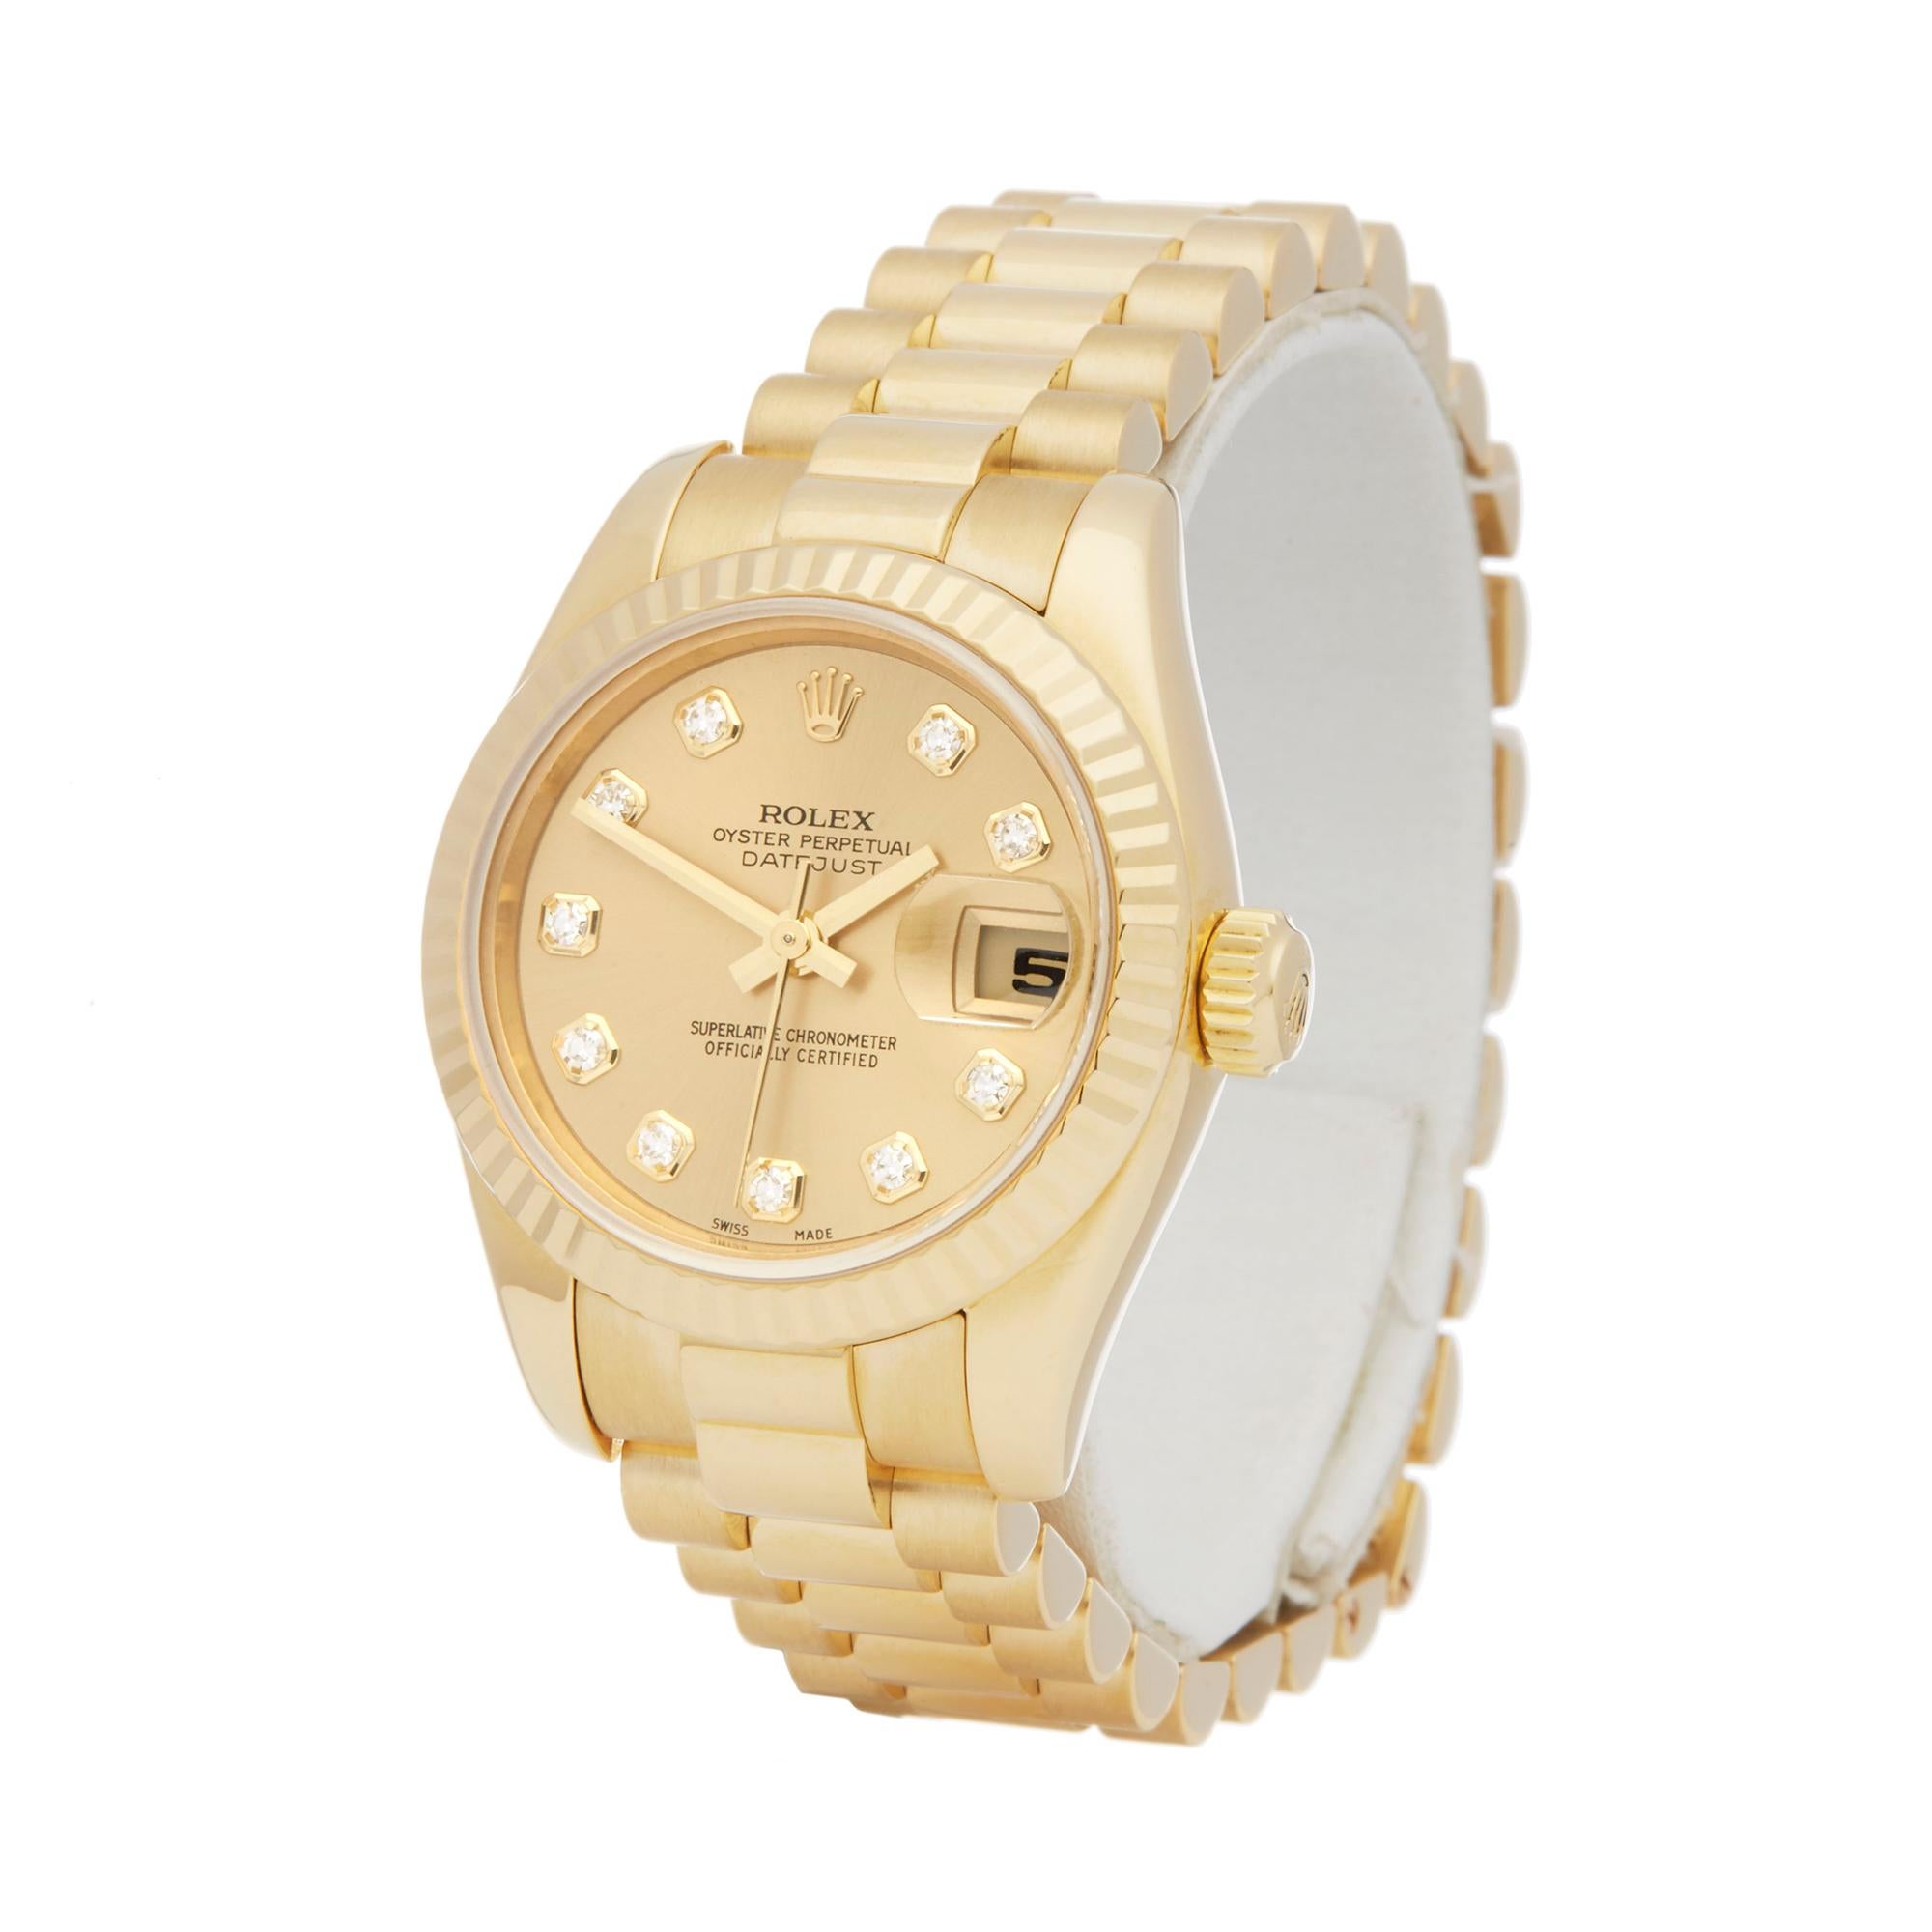 Ref: W6292
Manufacturer: Rolex
Model: DateJust
Model Ref: 179178
Age: 1st November 2006
Gender: Mens
Complete With: Box & Guarantee
Dial: Mother Of Pearl With Diamond Markers
Glass: Sapphire Crystal
Movement: Automatic
Water Resistance: To